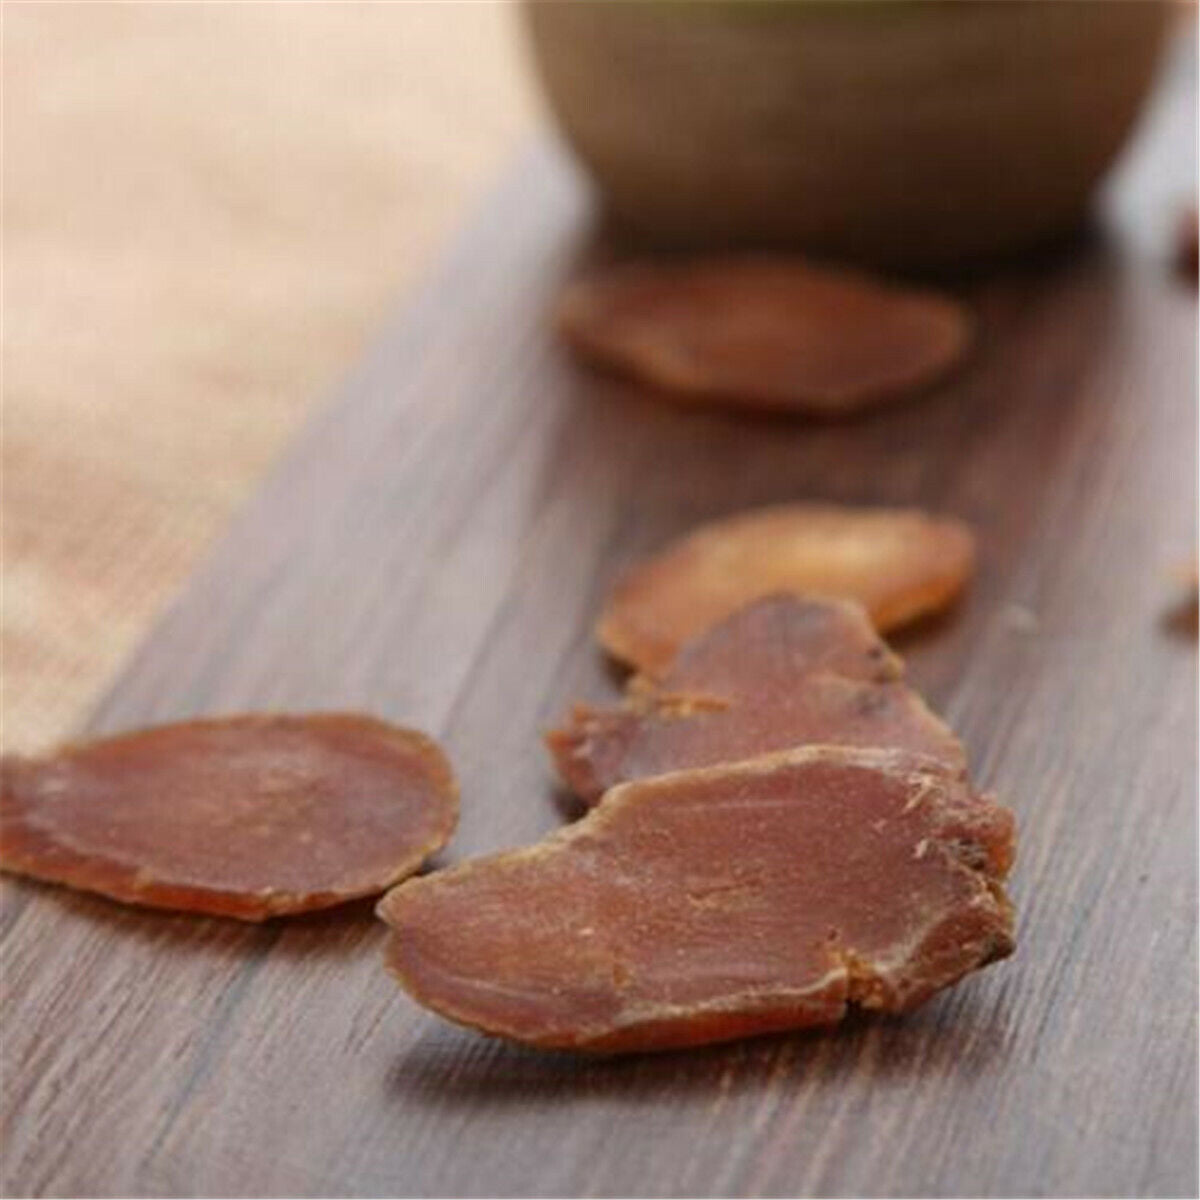 10 Years Healthy Of Herbs 100g High Quality Red Ginseng Slices Dry Ginseng Root